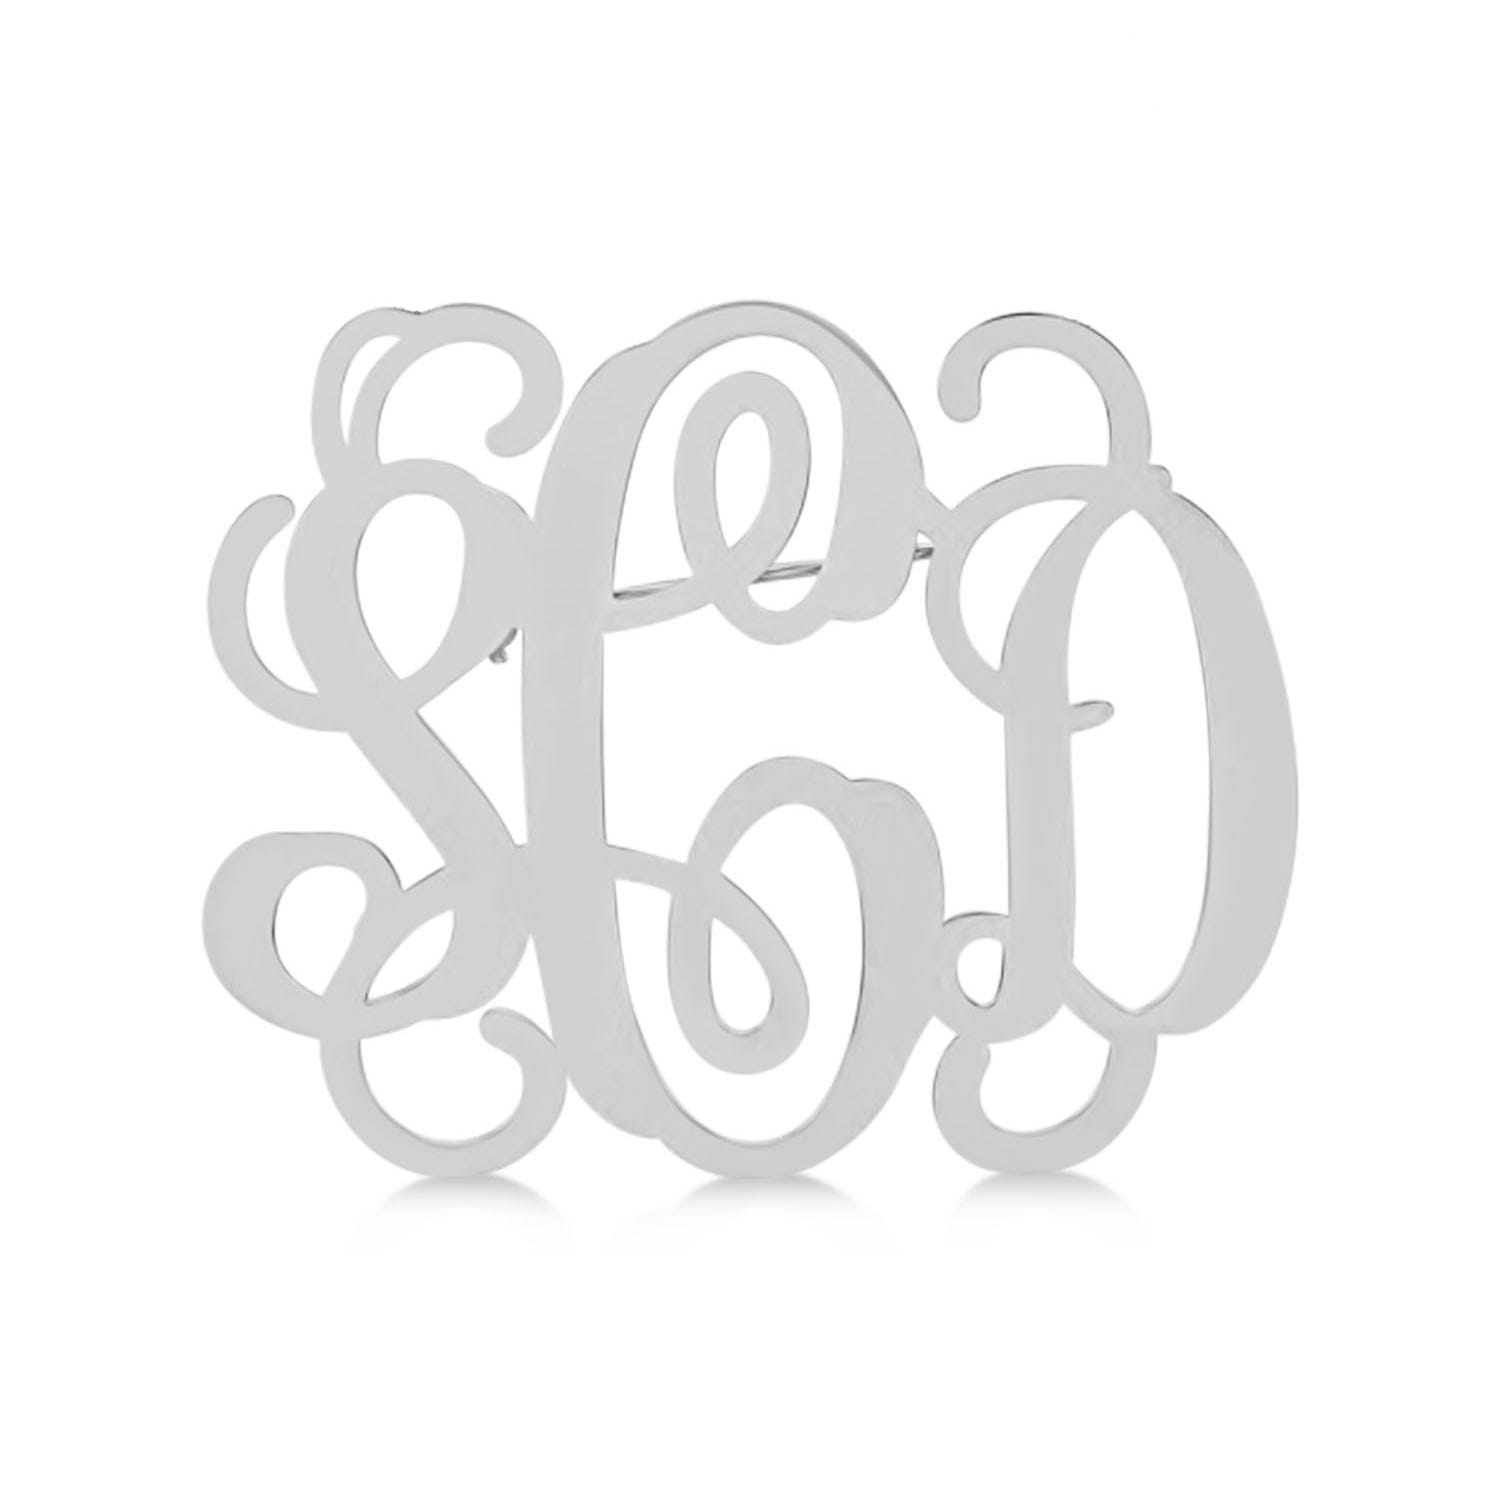 Initial Monogram Brooch Pin 14k White Gold over Sterling Silver